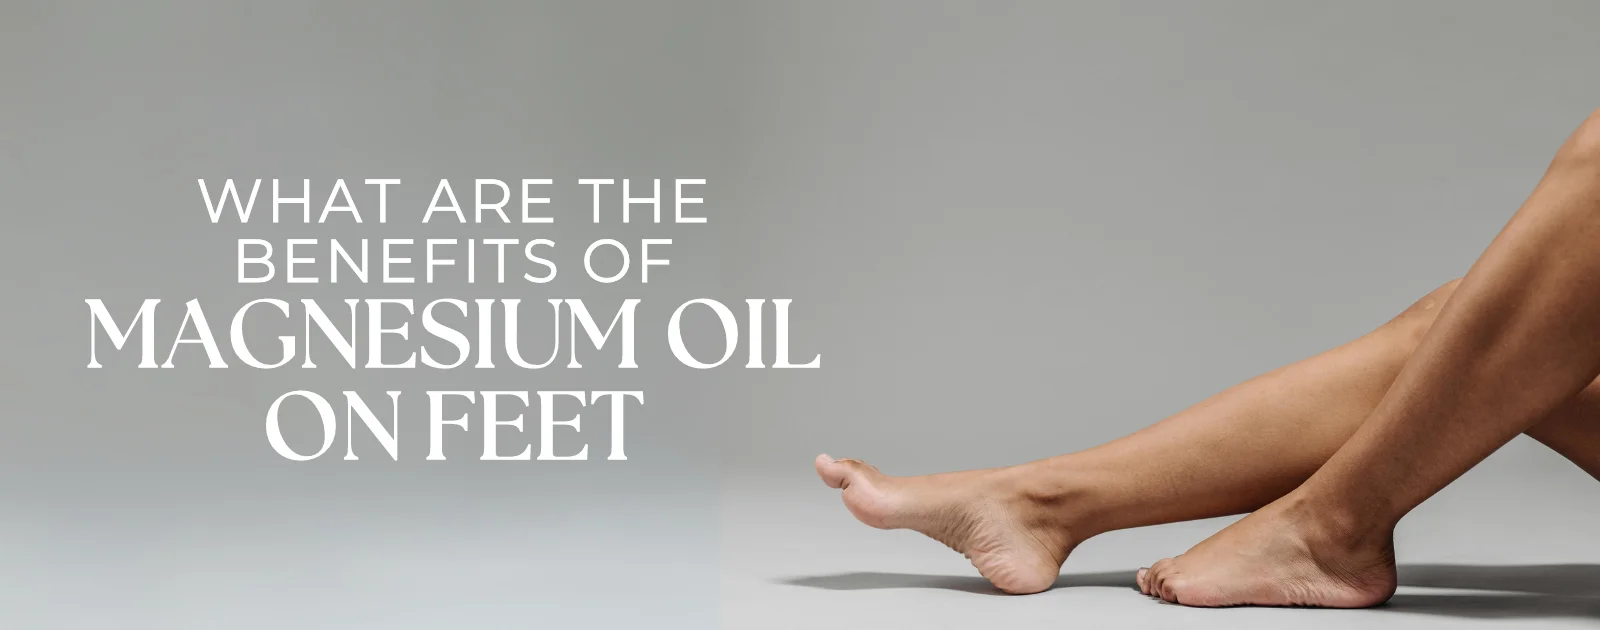 What Are the Benefits of Magnesium Oil on Feet